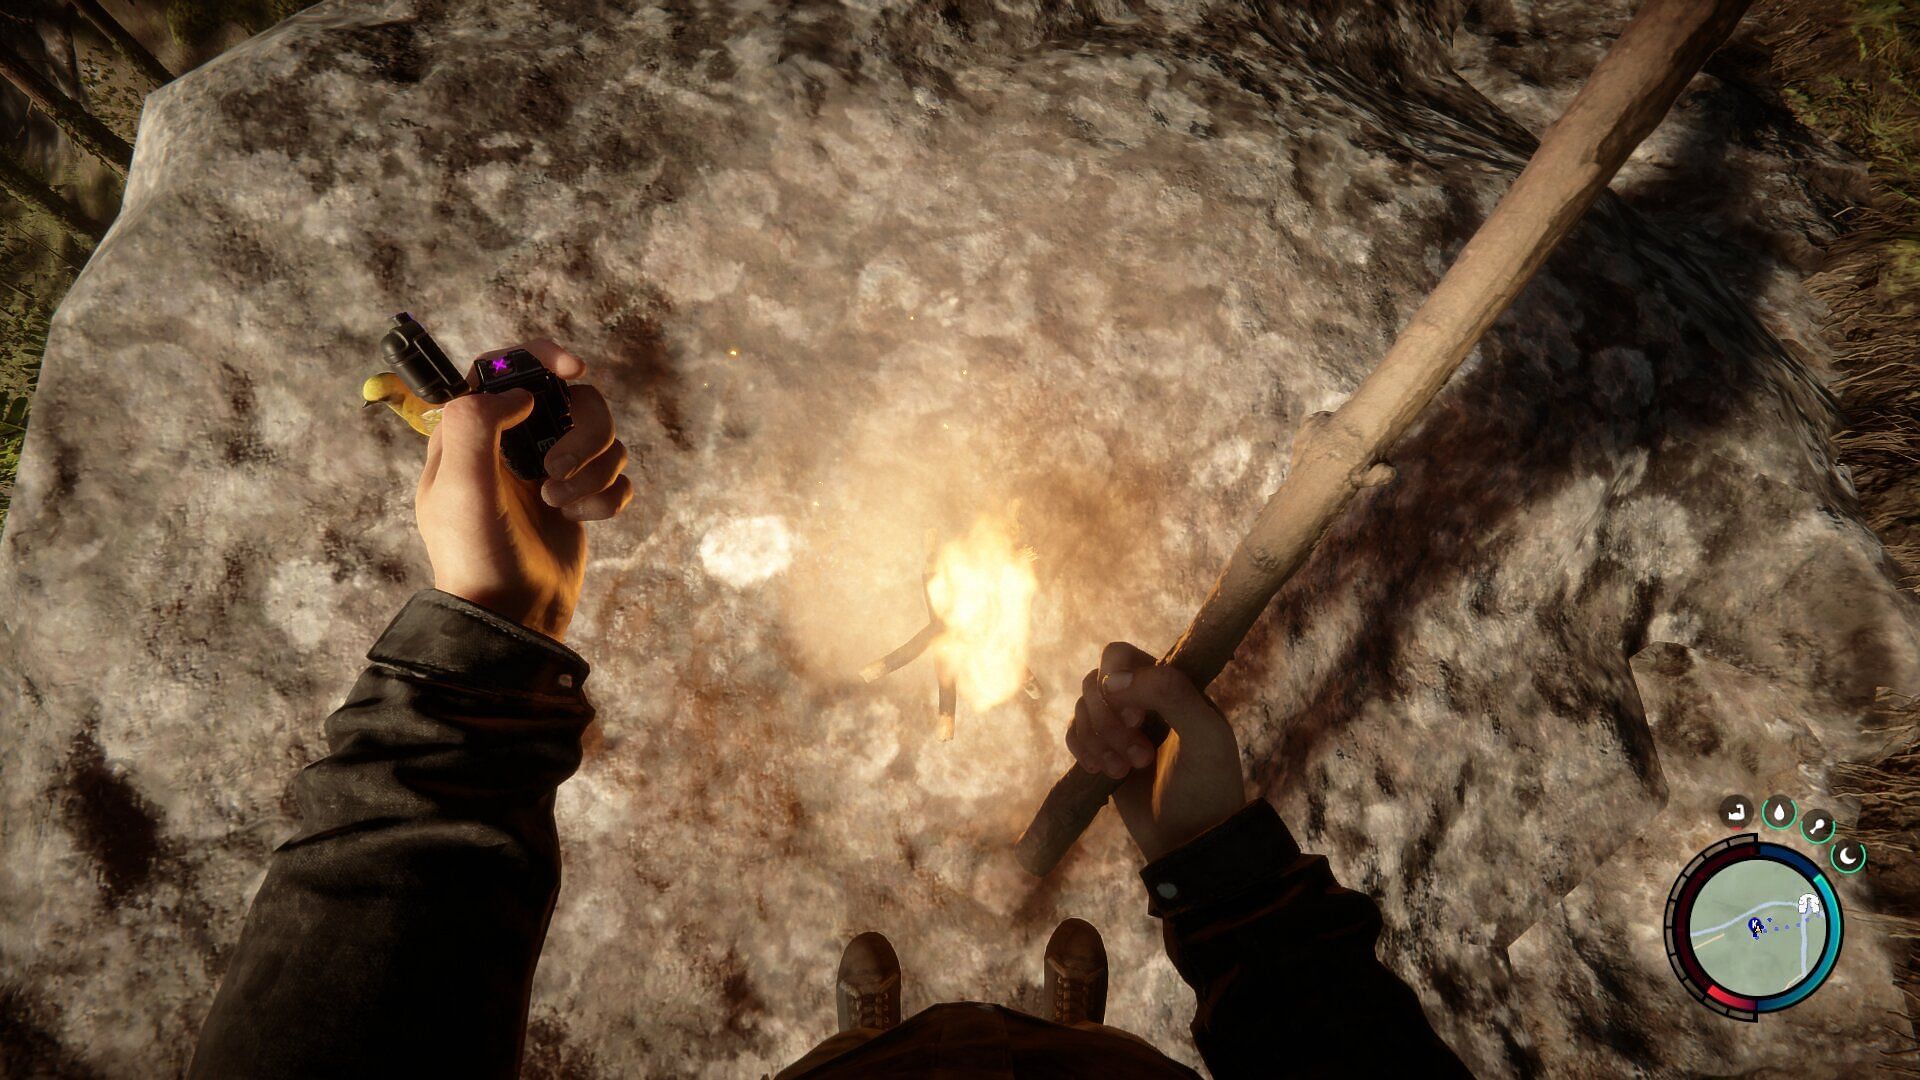 You can create fire using Sticks and Lighter in Sons of the Forest (Image via Endnight Games)